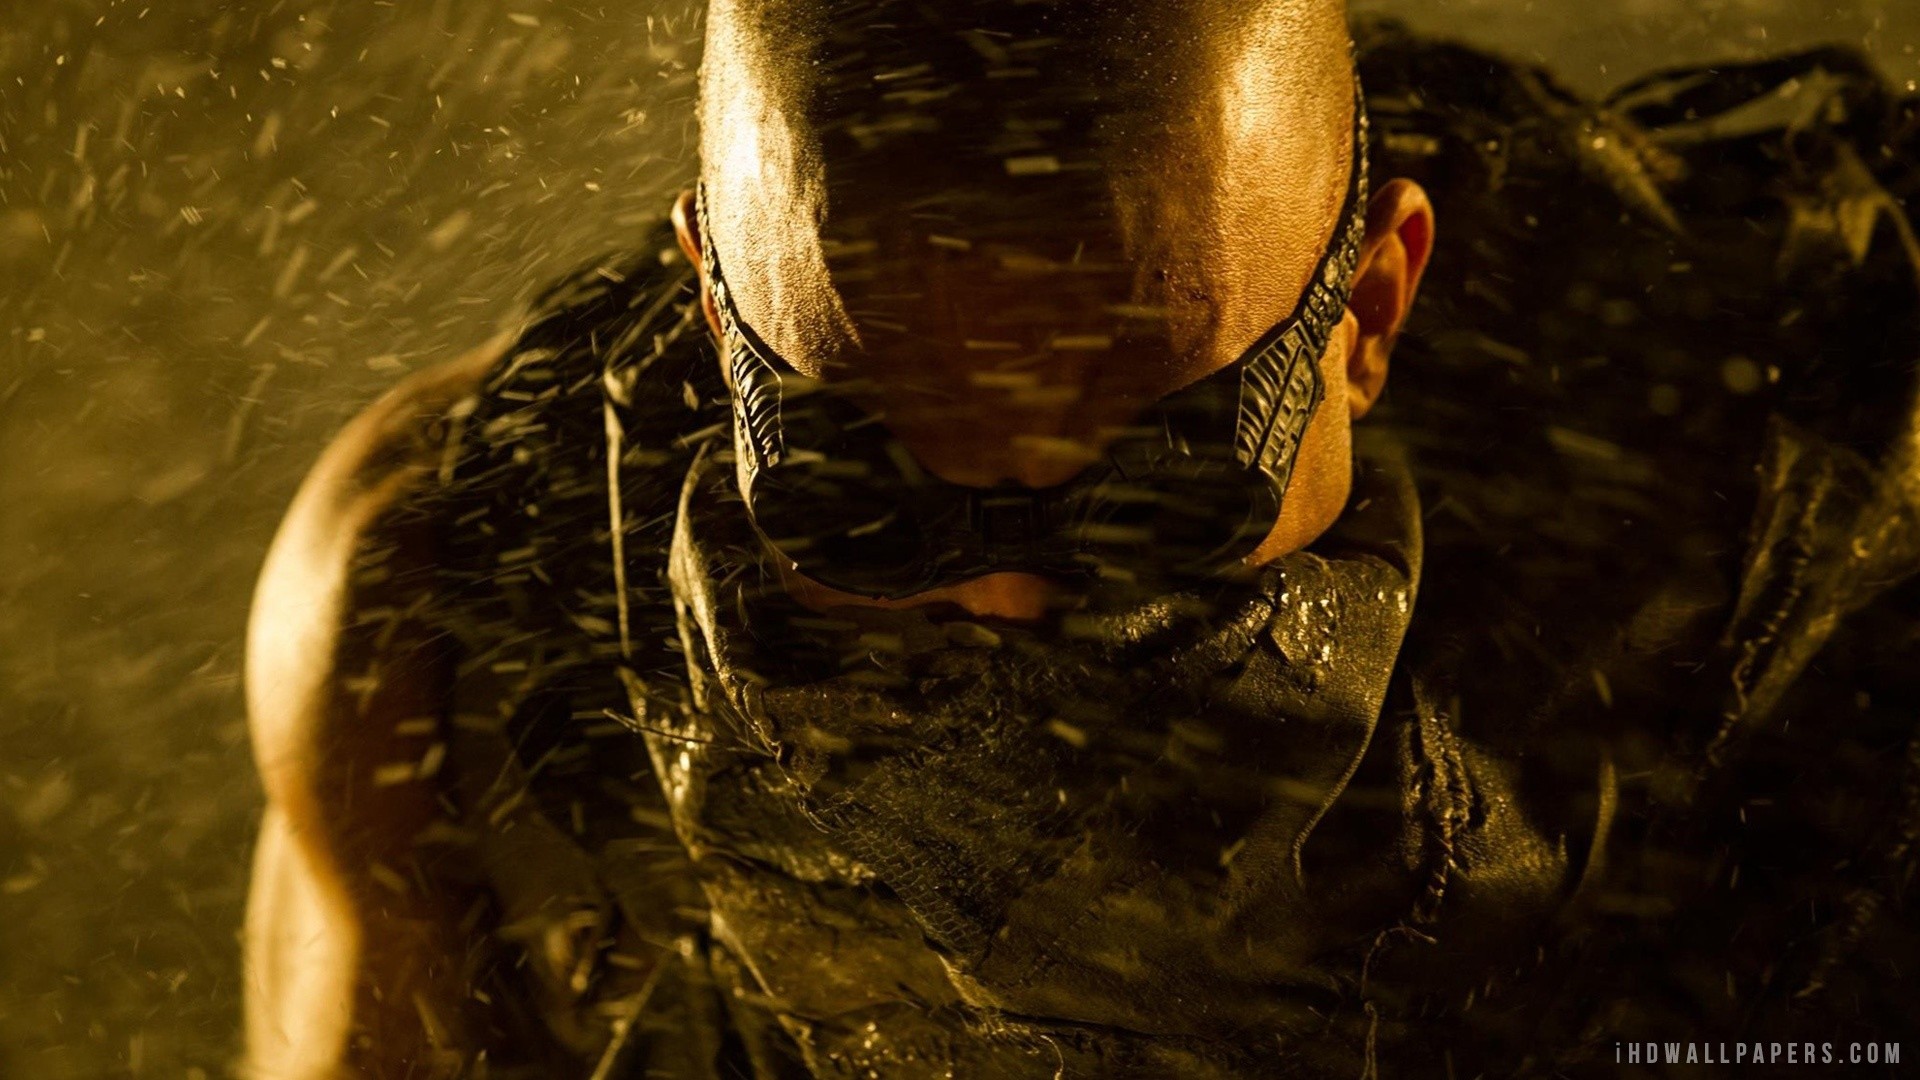 1920x1080 The Chronicles Of Riddick HD Wallpapers Backgrounds 1920Ã1080 Riddick  Wallpapers (25 Wallpapers)